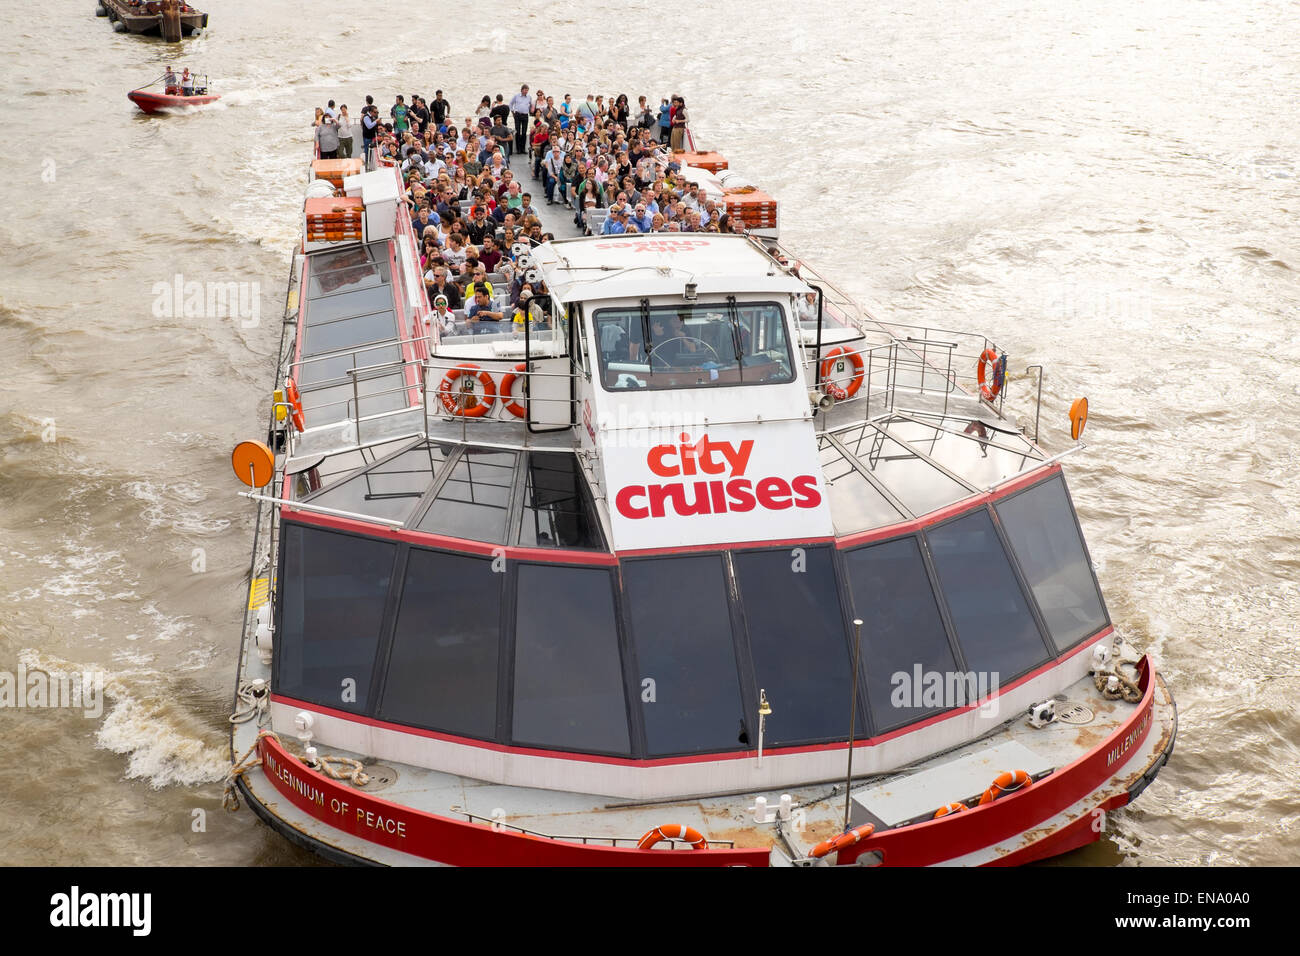 City cruses boat with passengers on the river Thames Stock Photo